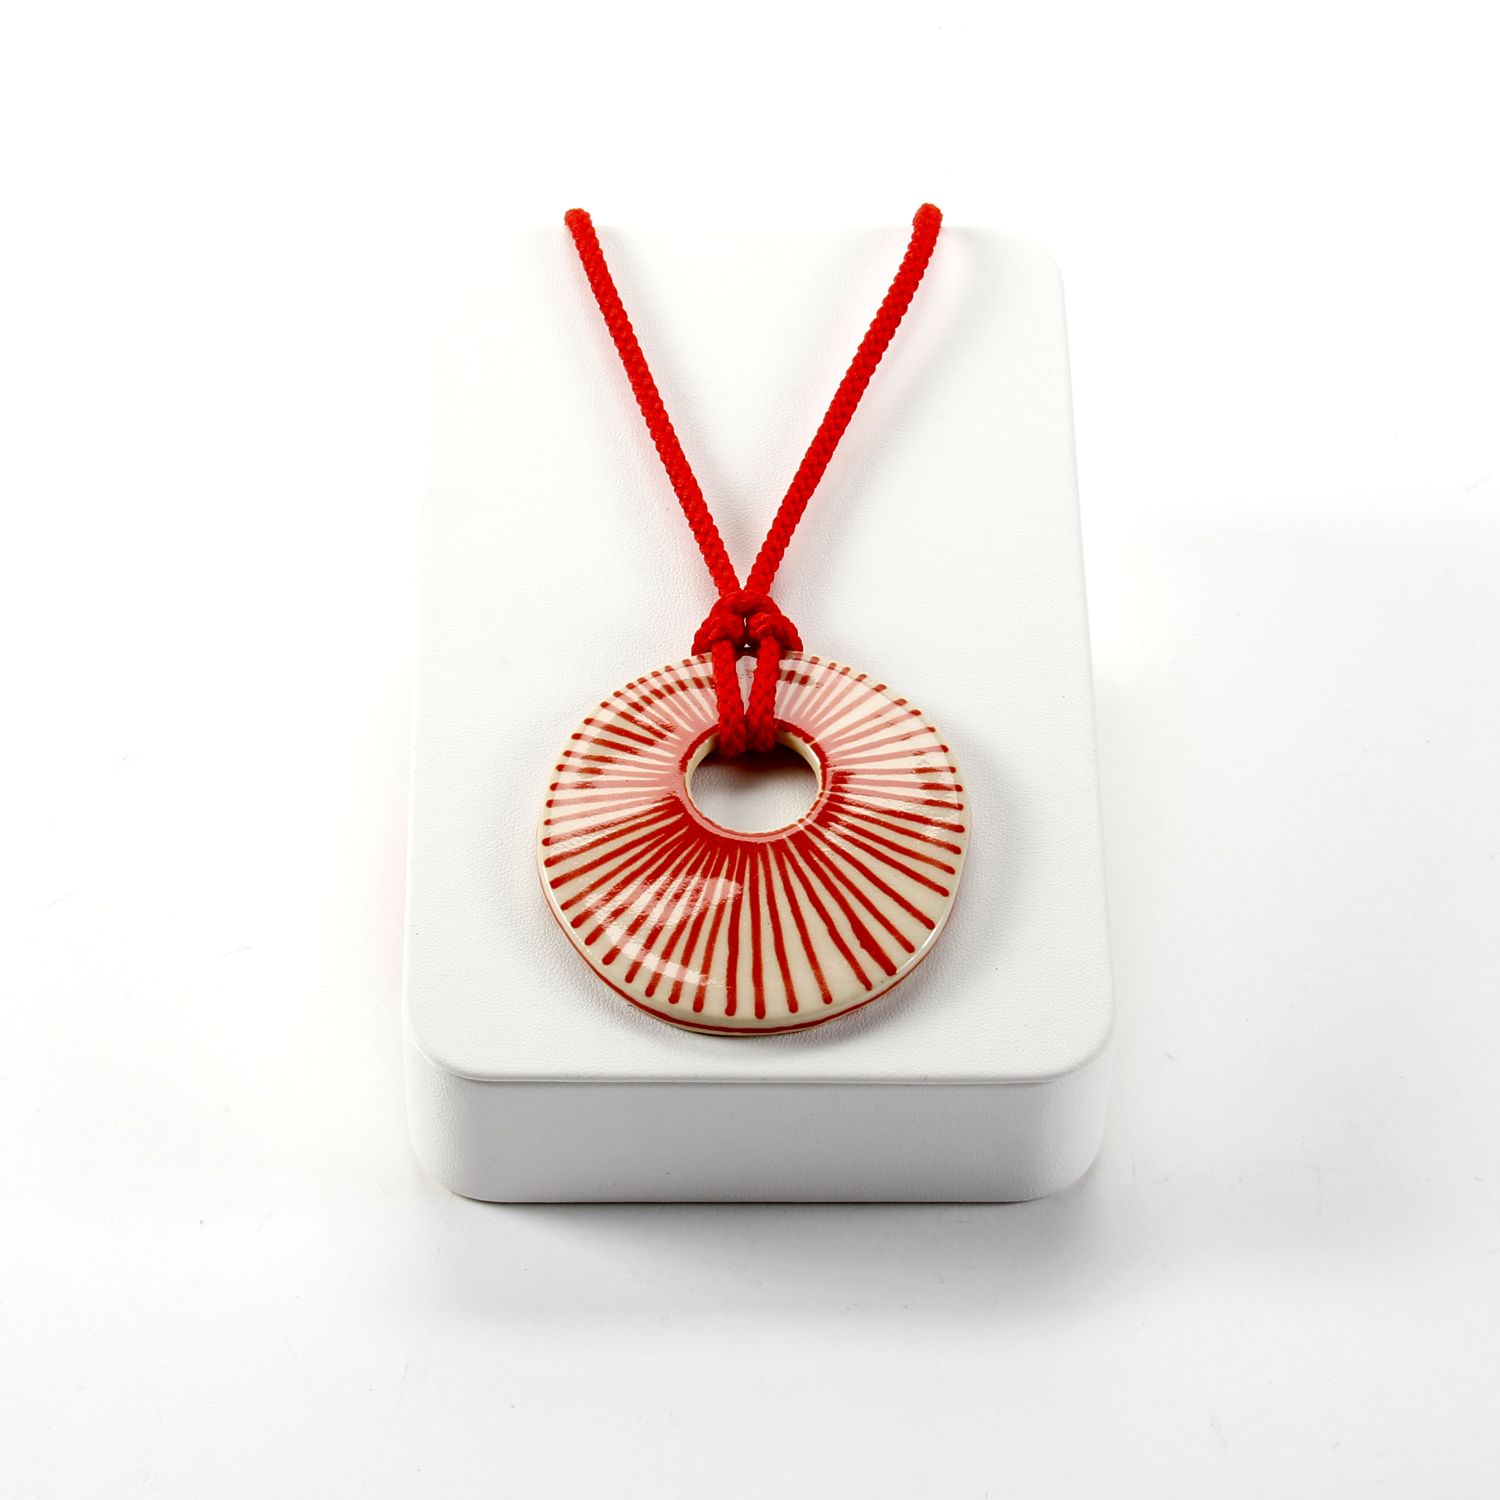 Here and Here: Pendant with Lines Product Image 3 of 3